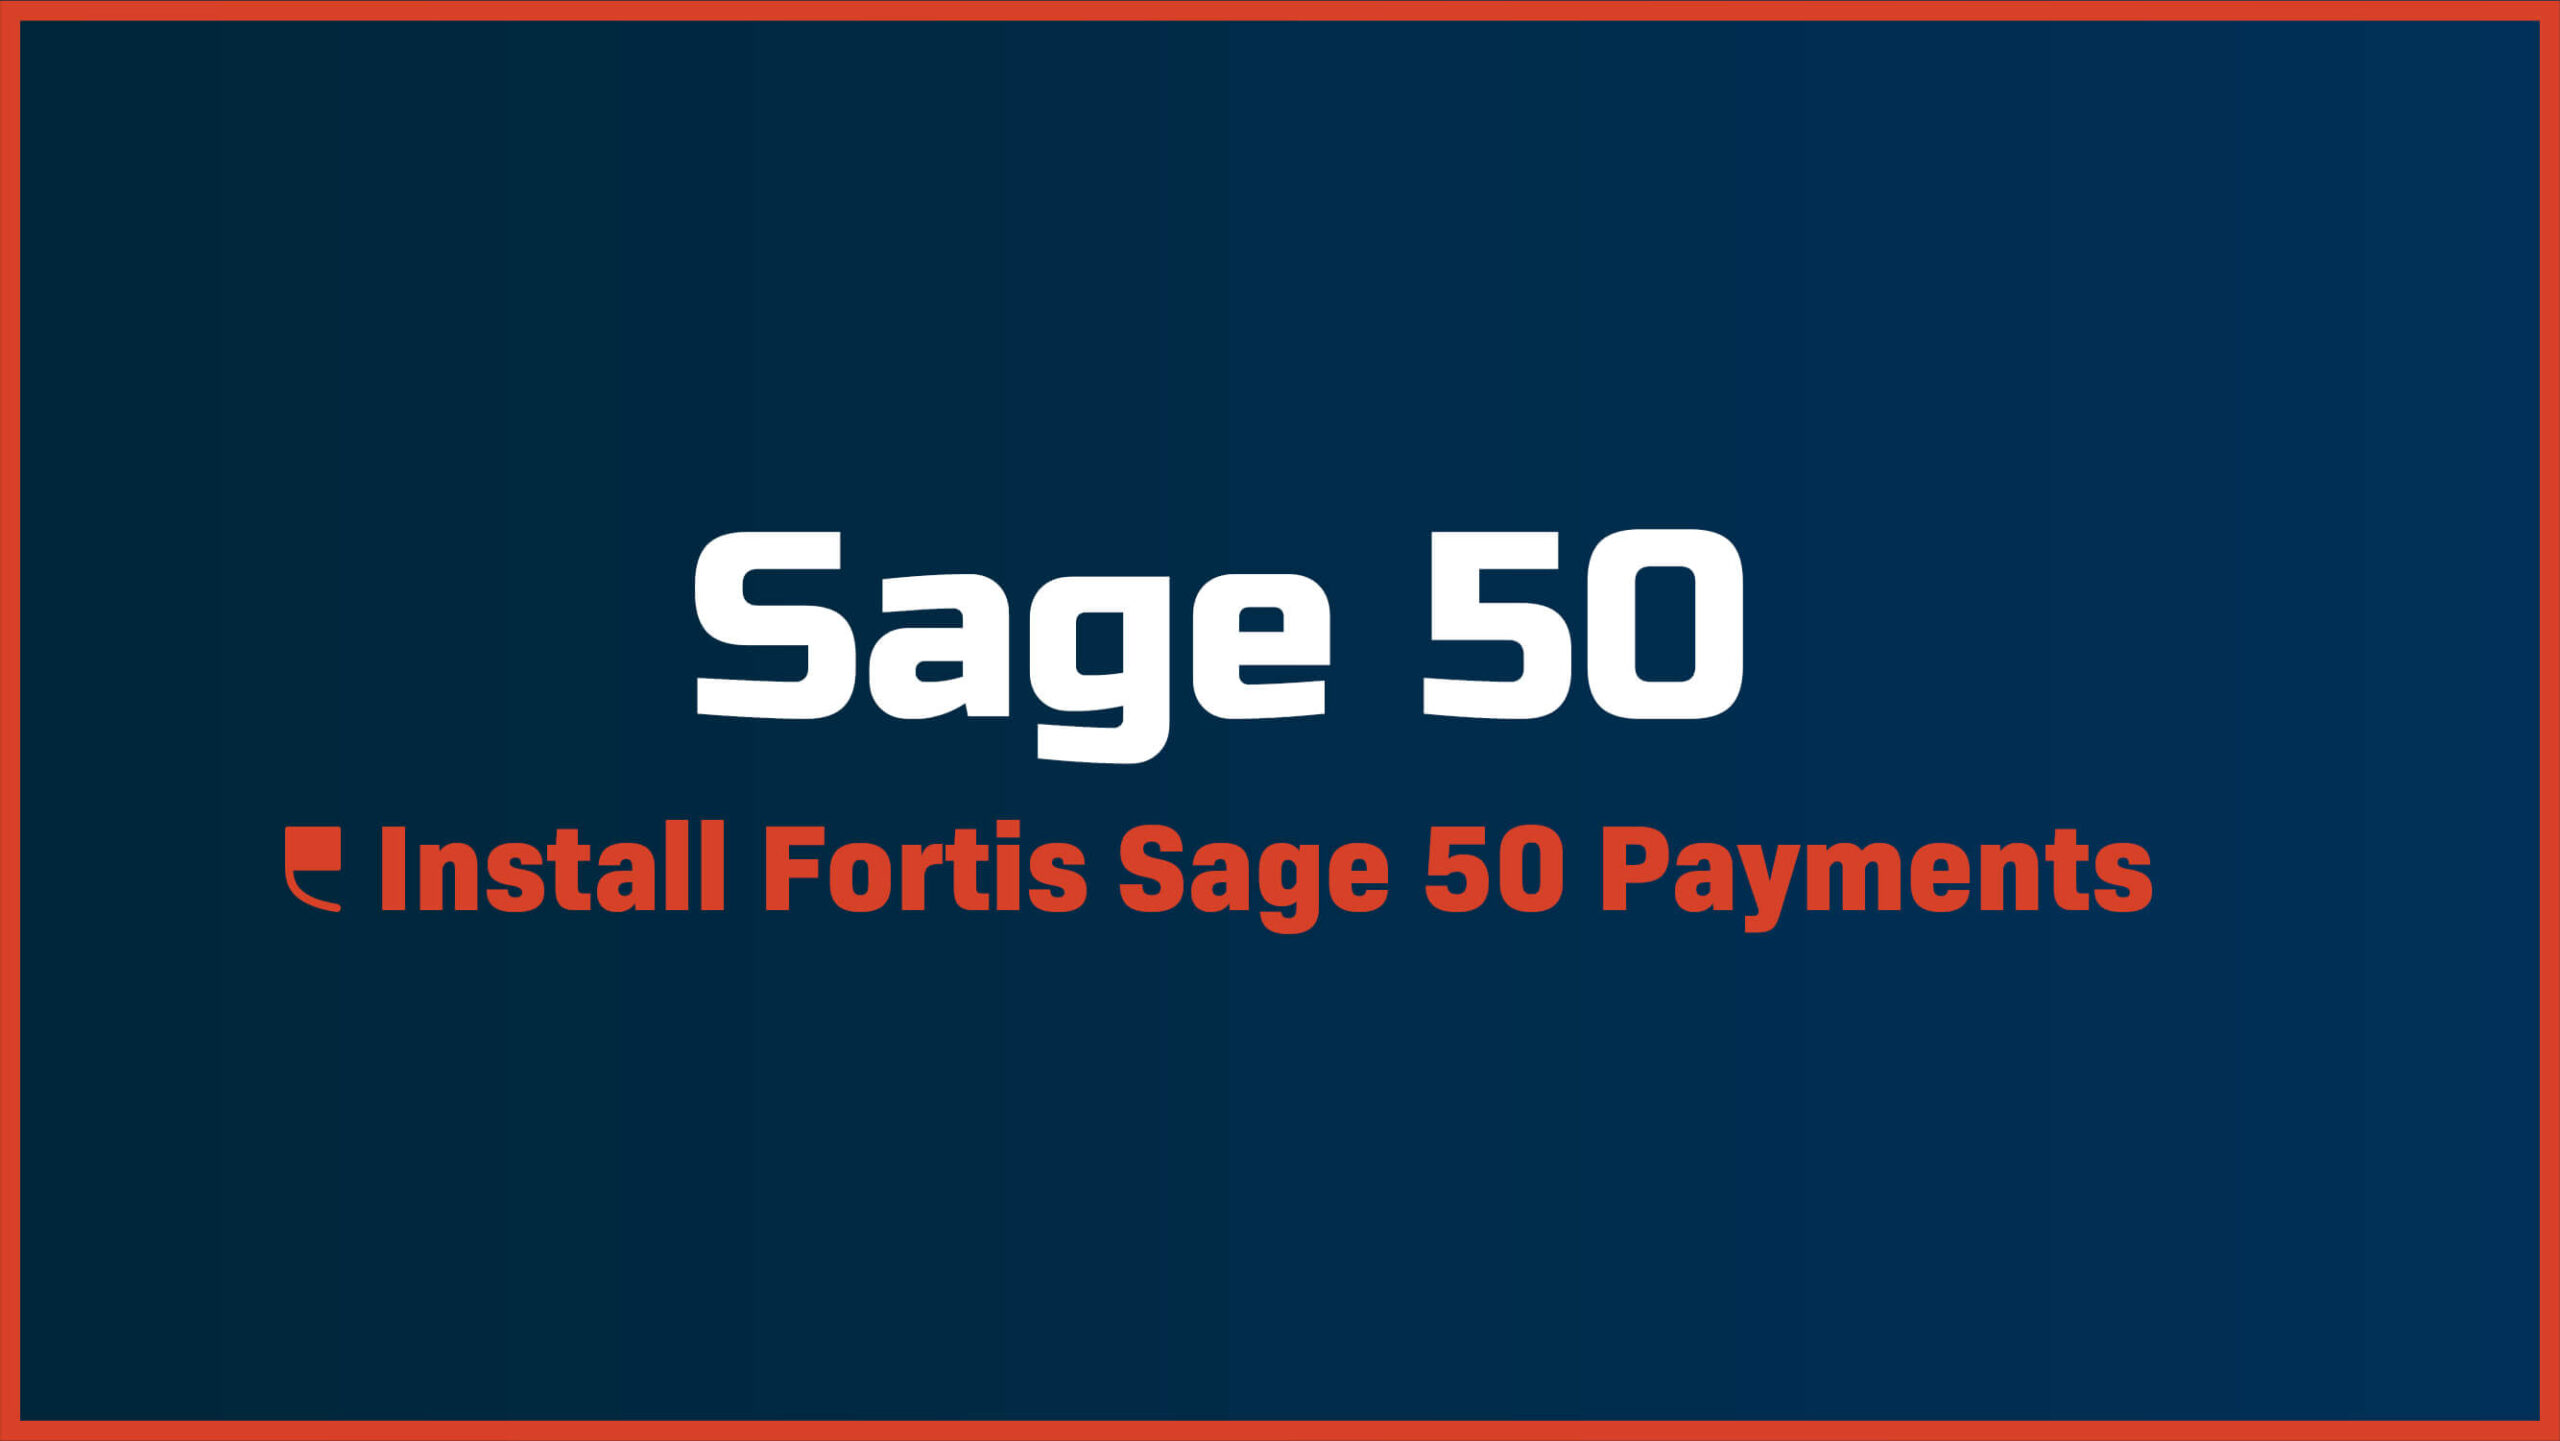 How to Install Fortis Sage 50 Payments - Featured Image